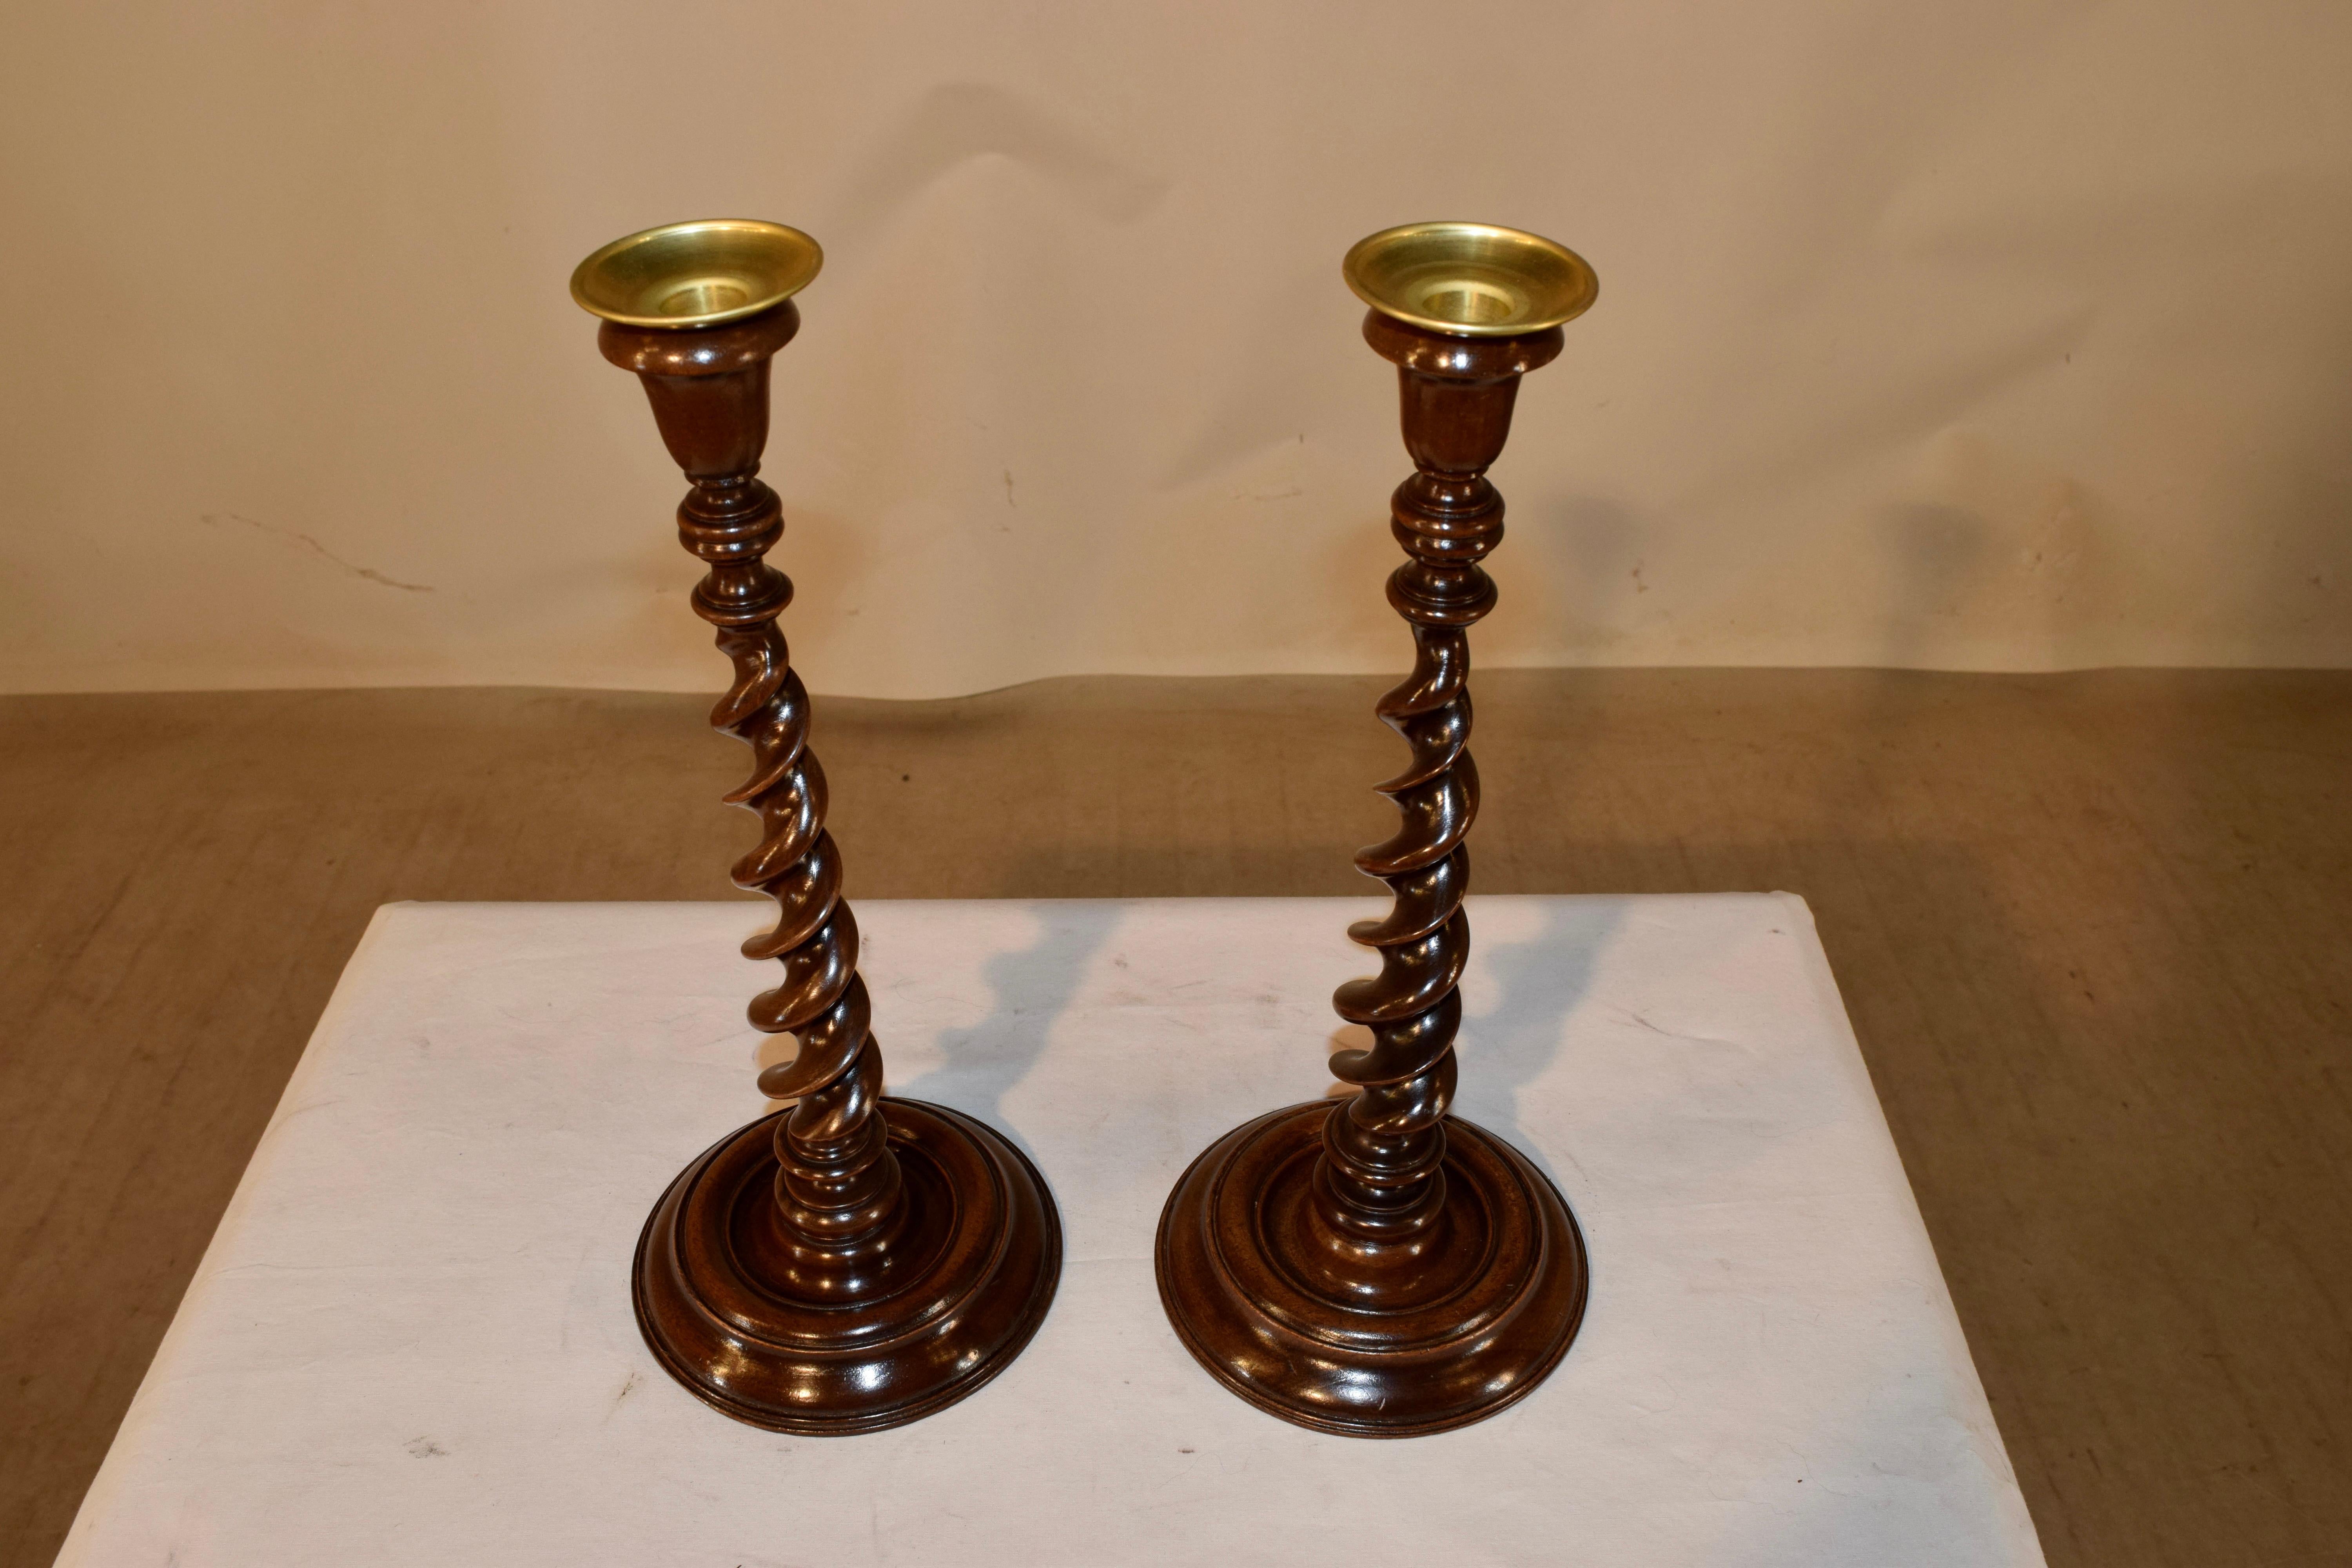 Pair of 19th century English ribbon twist candlesticks made from mahogany. The bobeches and candle cups are hand cast brass supported on finely hand-turned ribbon barley twist stems over turned bases. Elegant form.